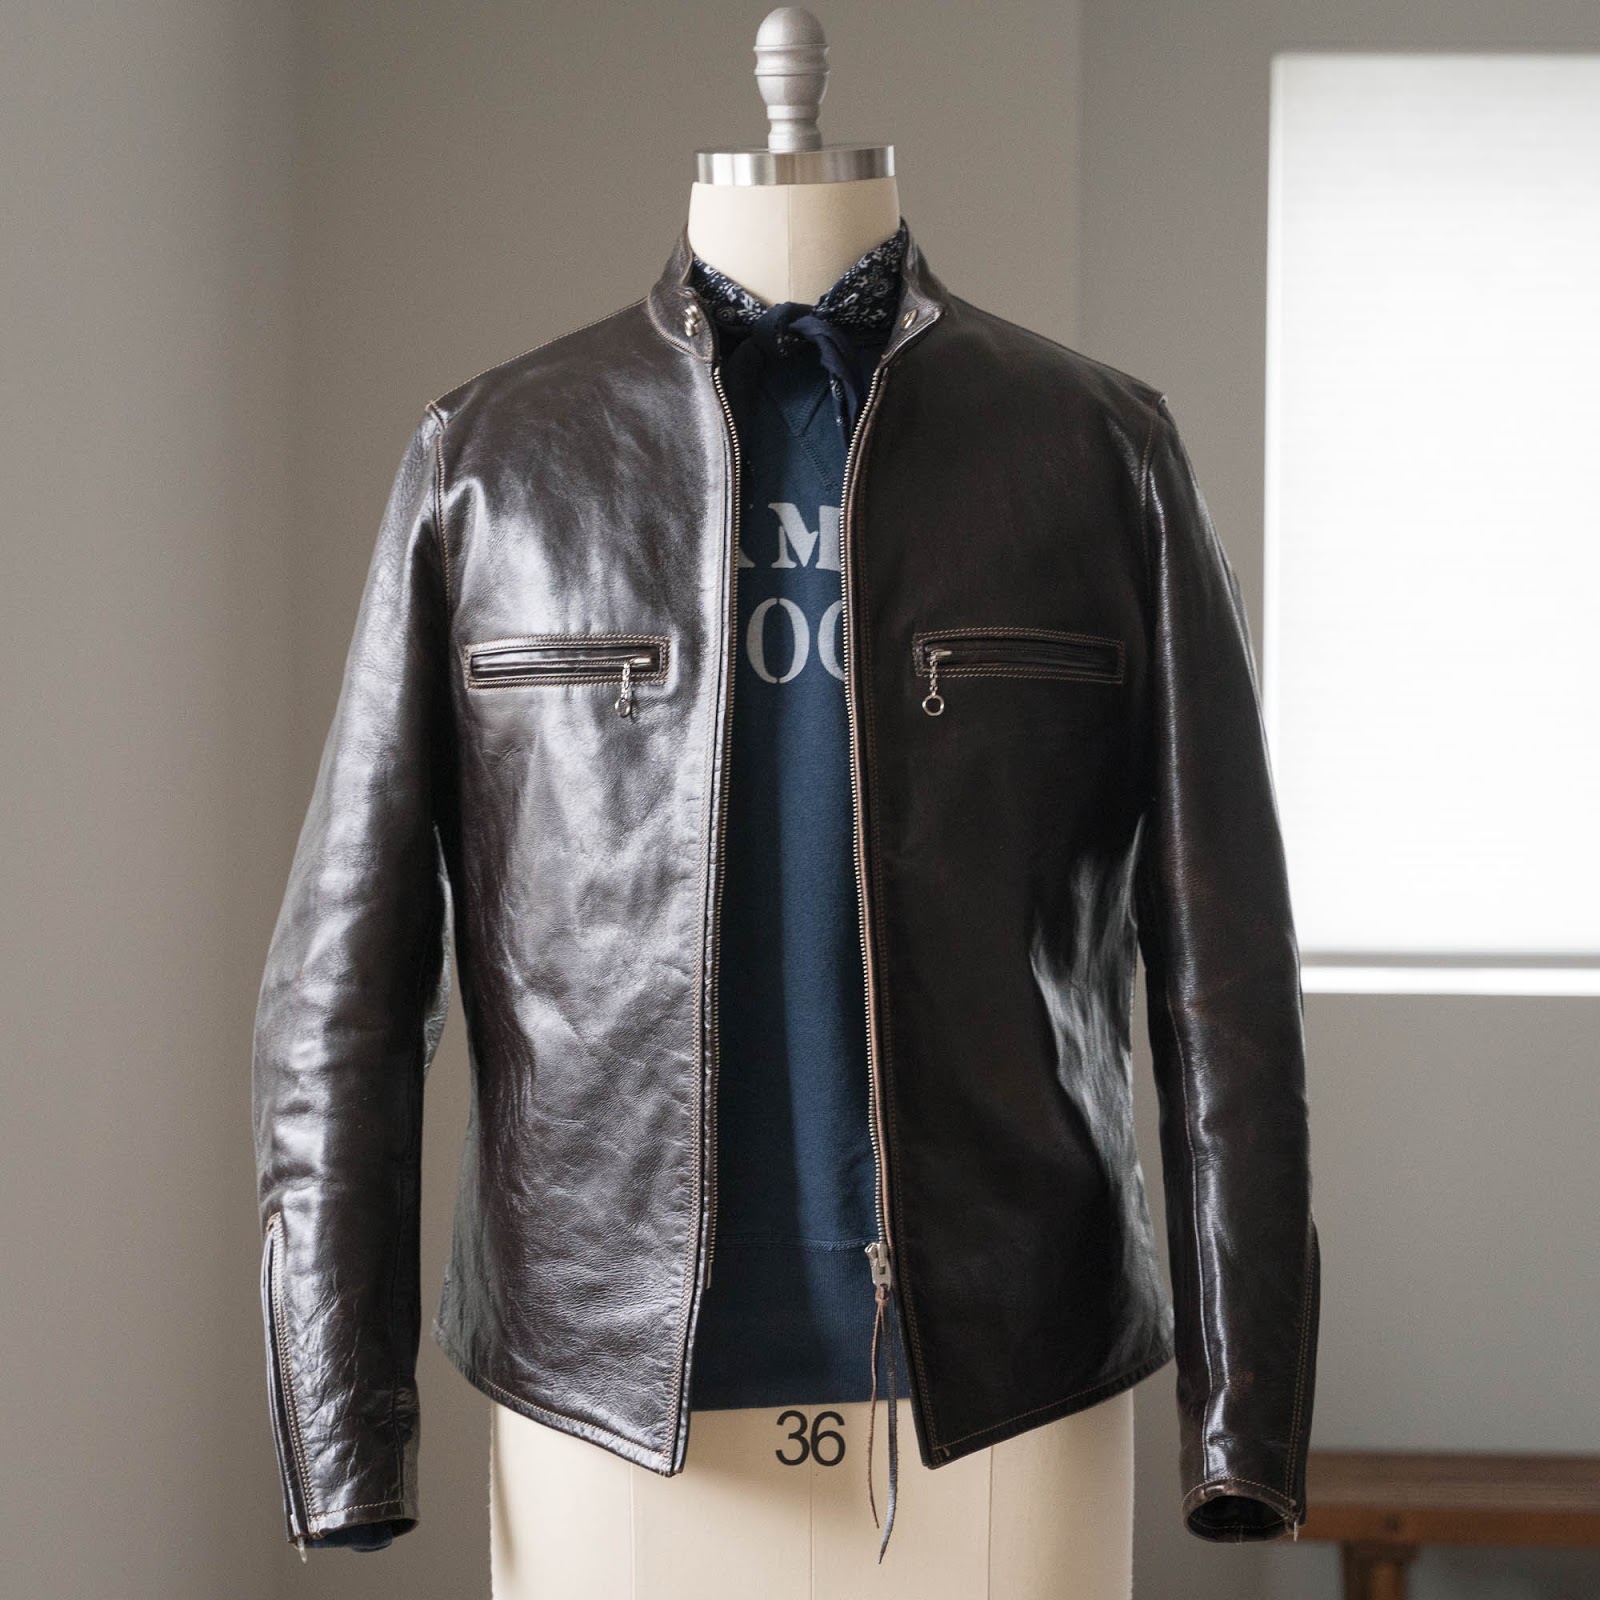 Fixing A Zipper On Leather Jacket - SCIN Blog